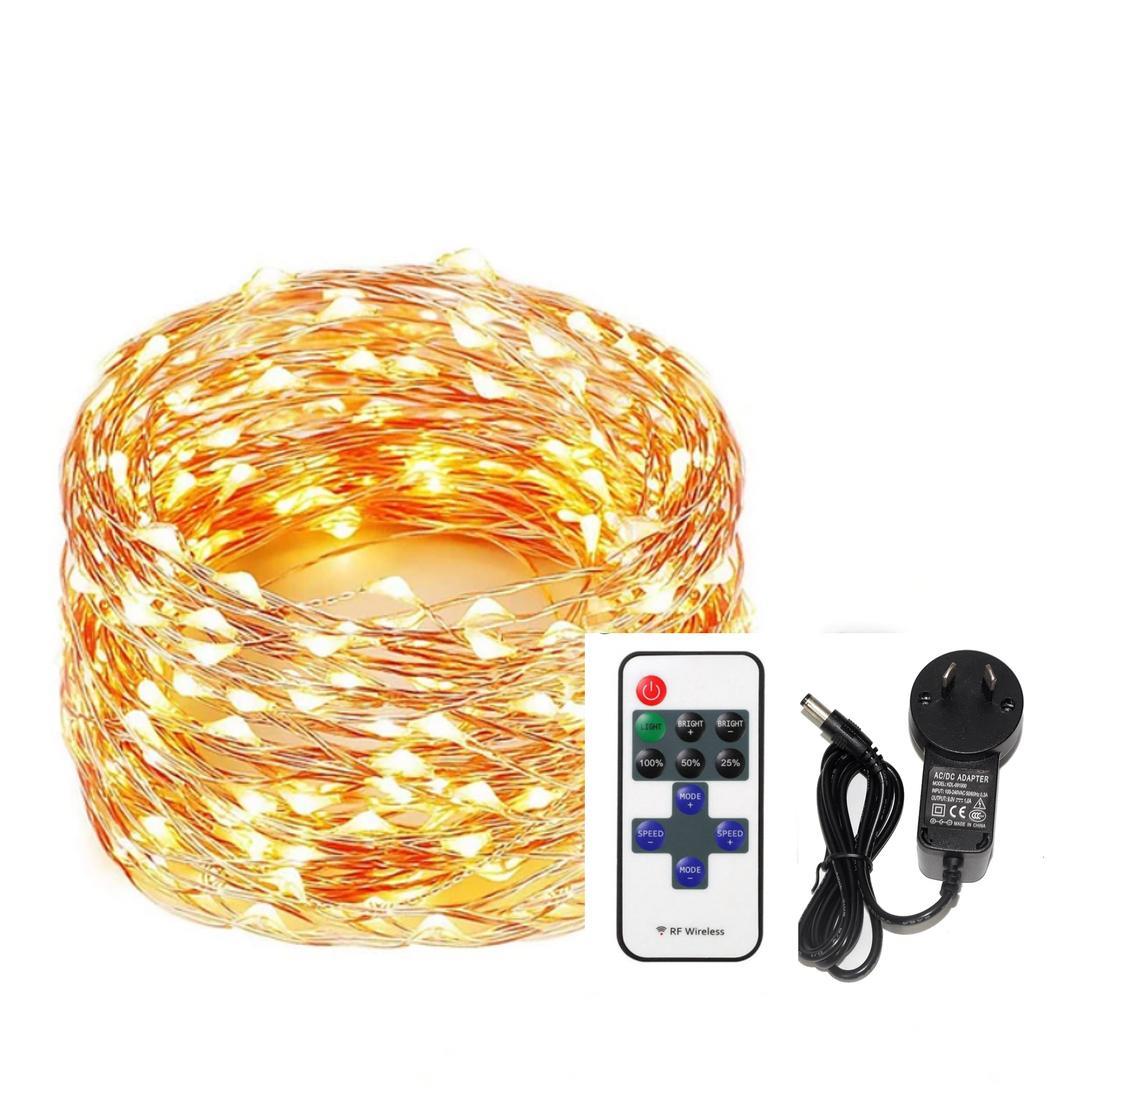 30m Plug-in Seed String Fairy Lights with Remote Control - Warm White